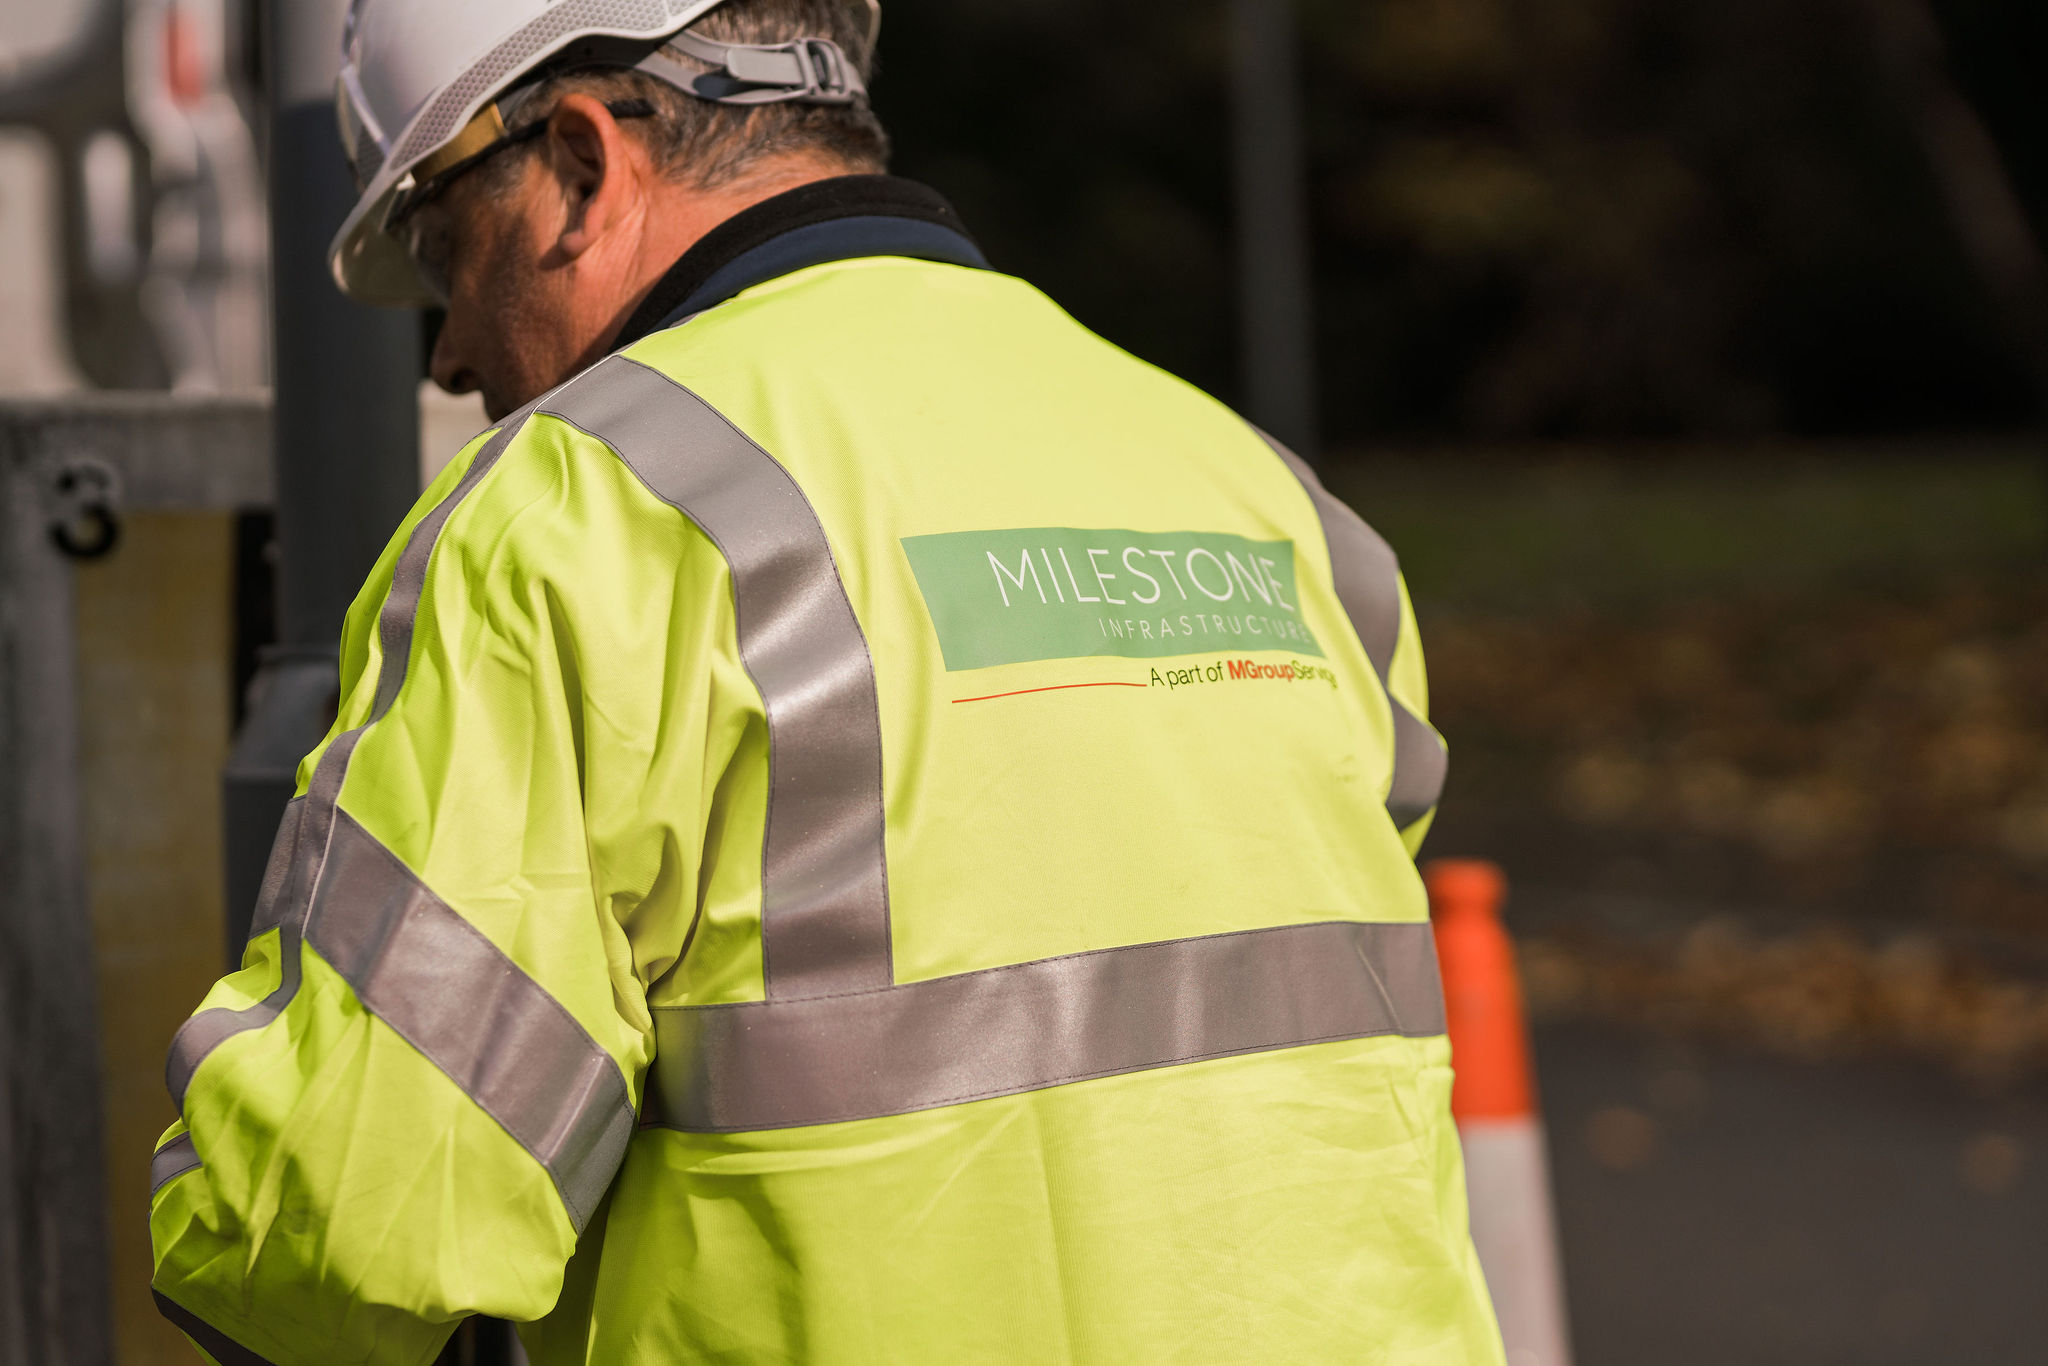 Milestone Infrastructure wins two Health and Safety awards.